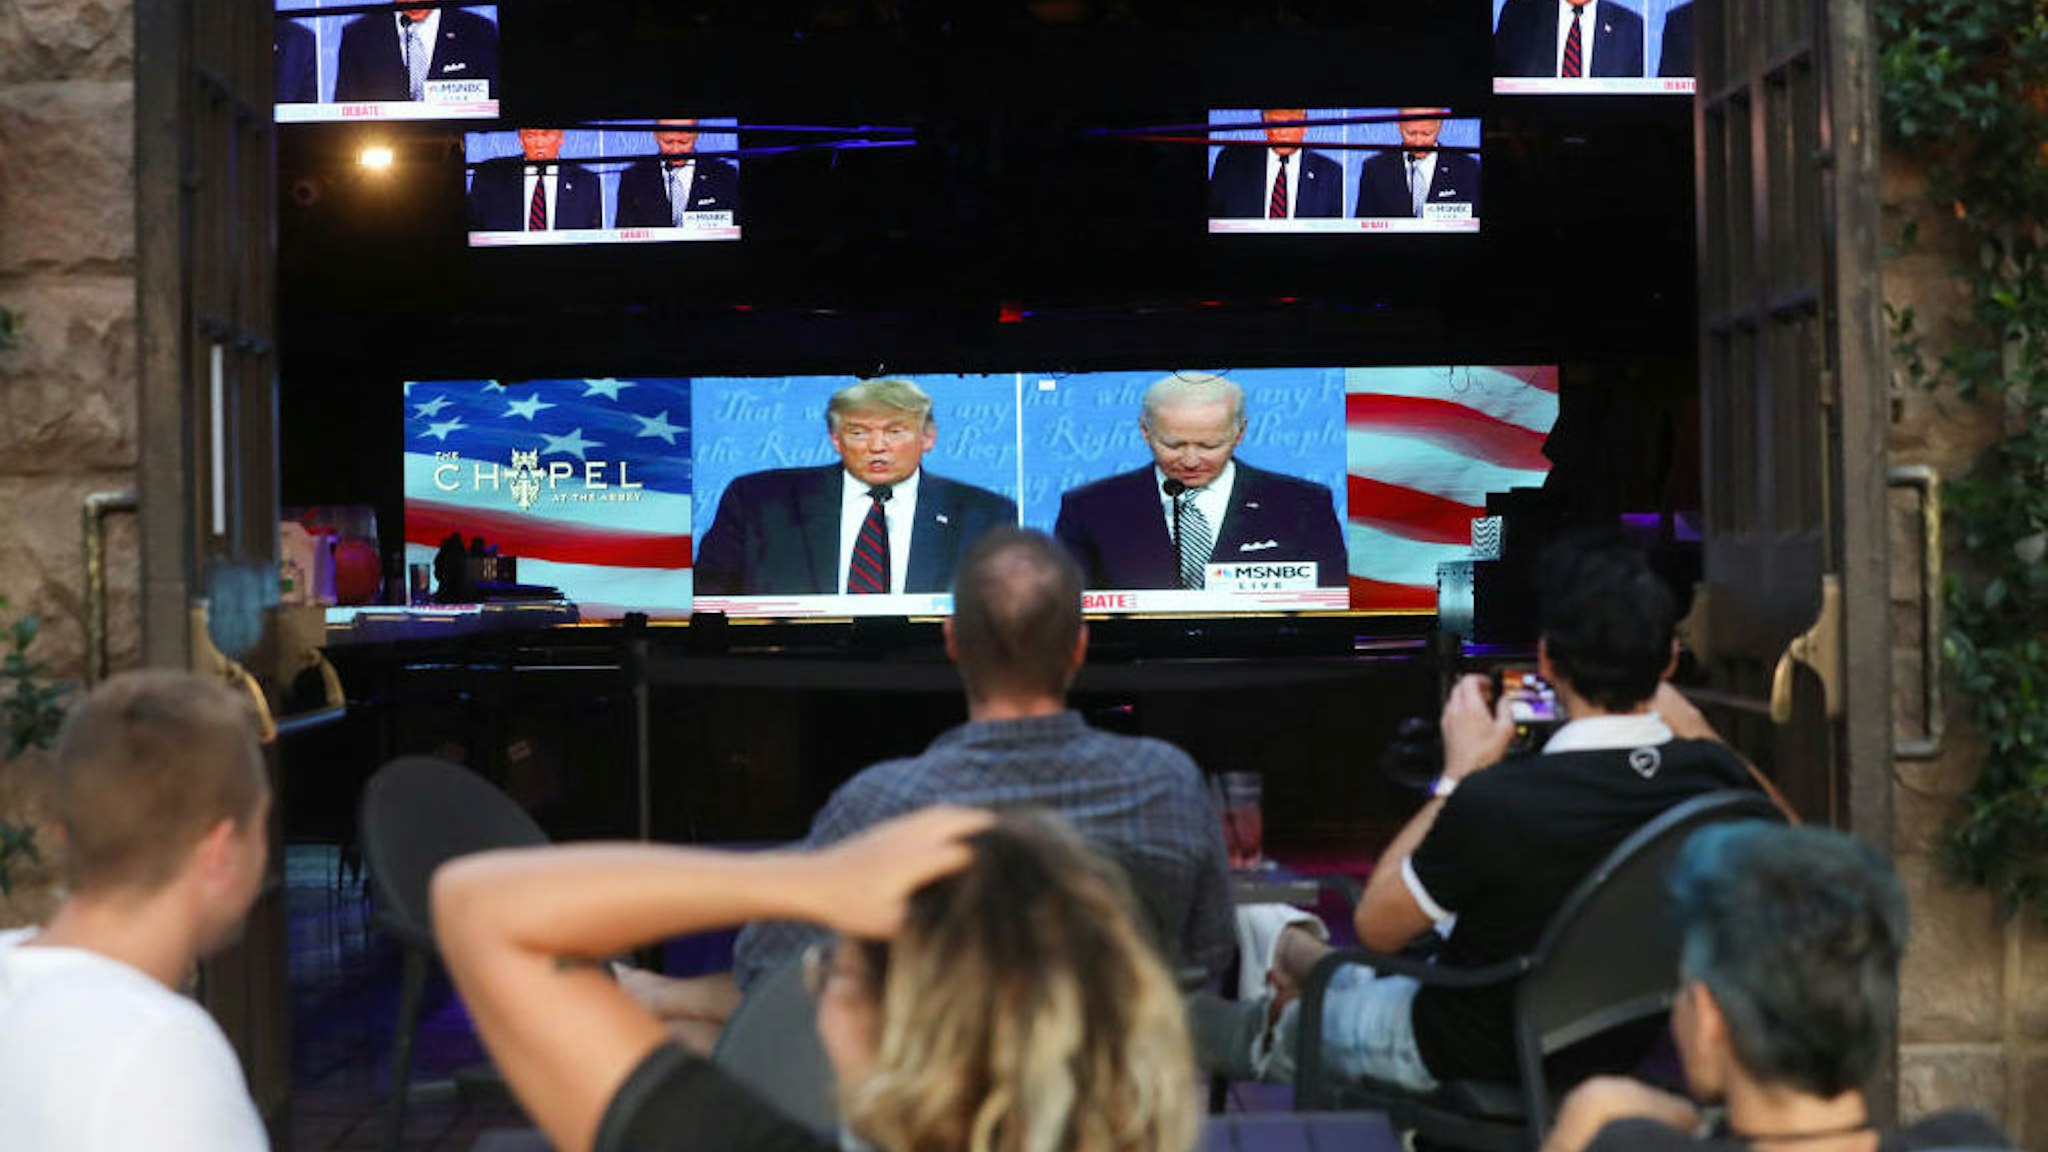 People sit and watch a broadcast of the first debate between President Donald Trump and Democratic presidential nominee Joe Biden at The Abbey, with socially distanced outdoor seating, on September 29, 2020 in West Hollywood, California. The debate being held in Cleveland, Ohio is the first of three scheduled debates between Trump and Biden. (Photo by Mario Tama/Getty Images)